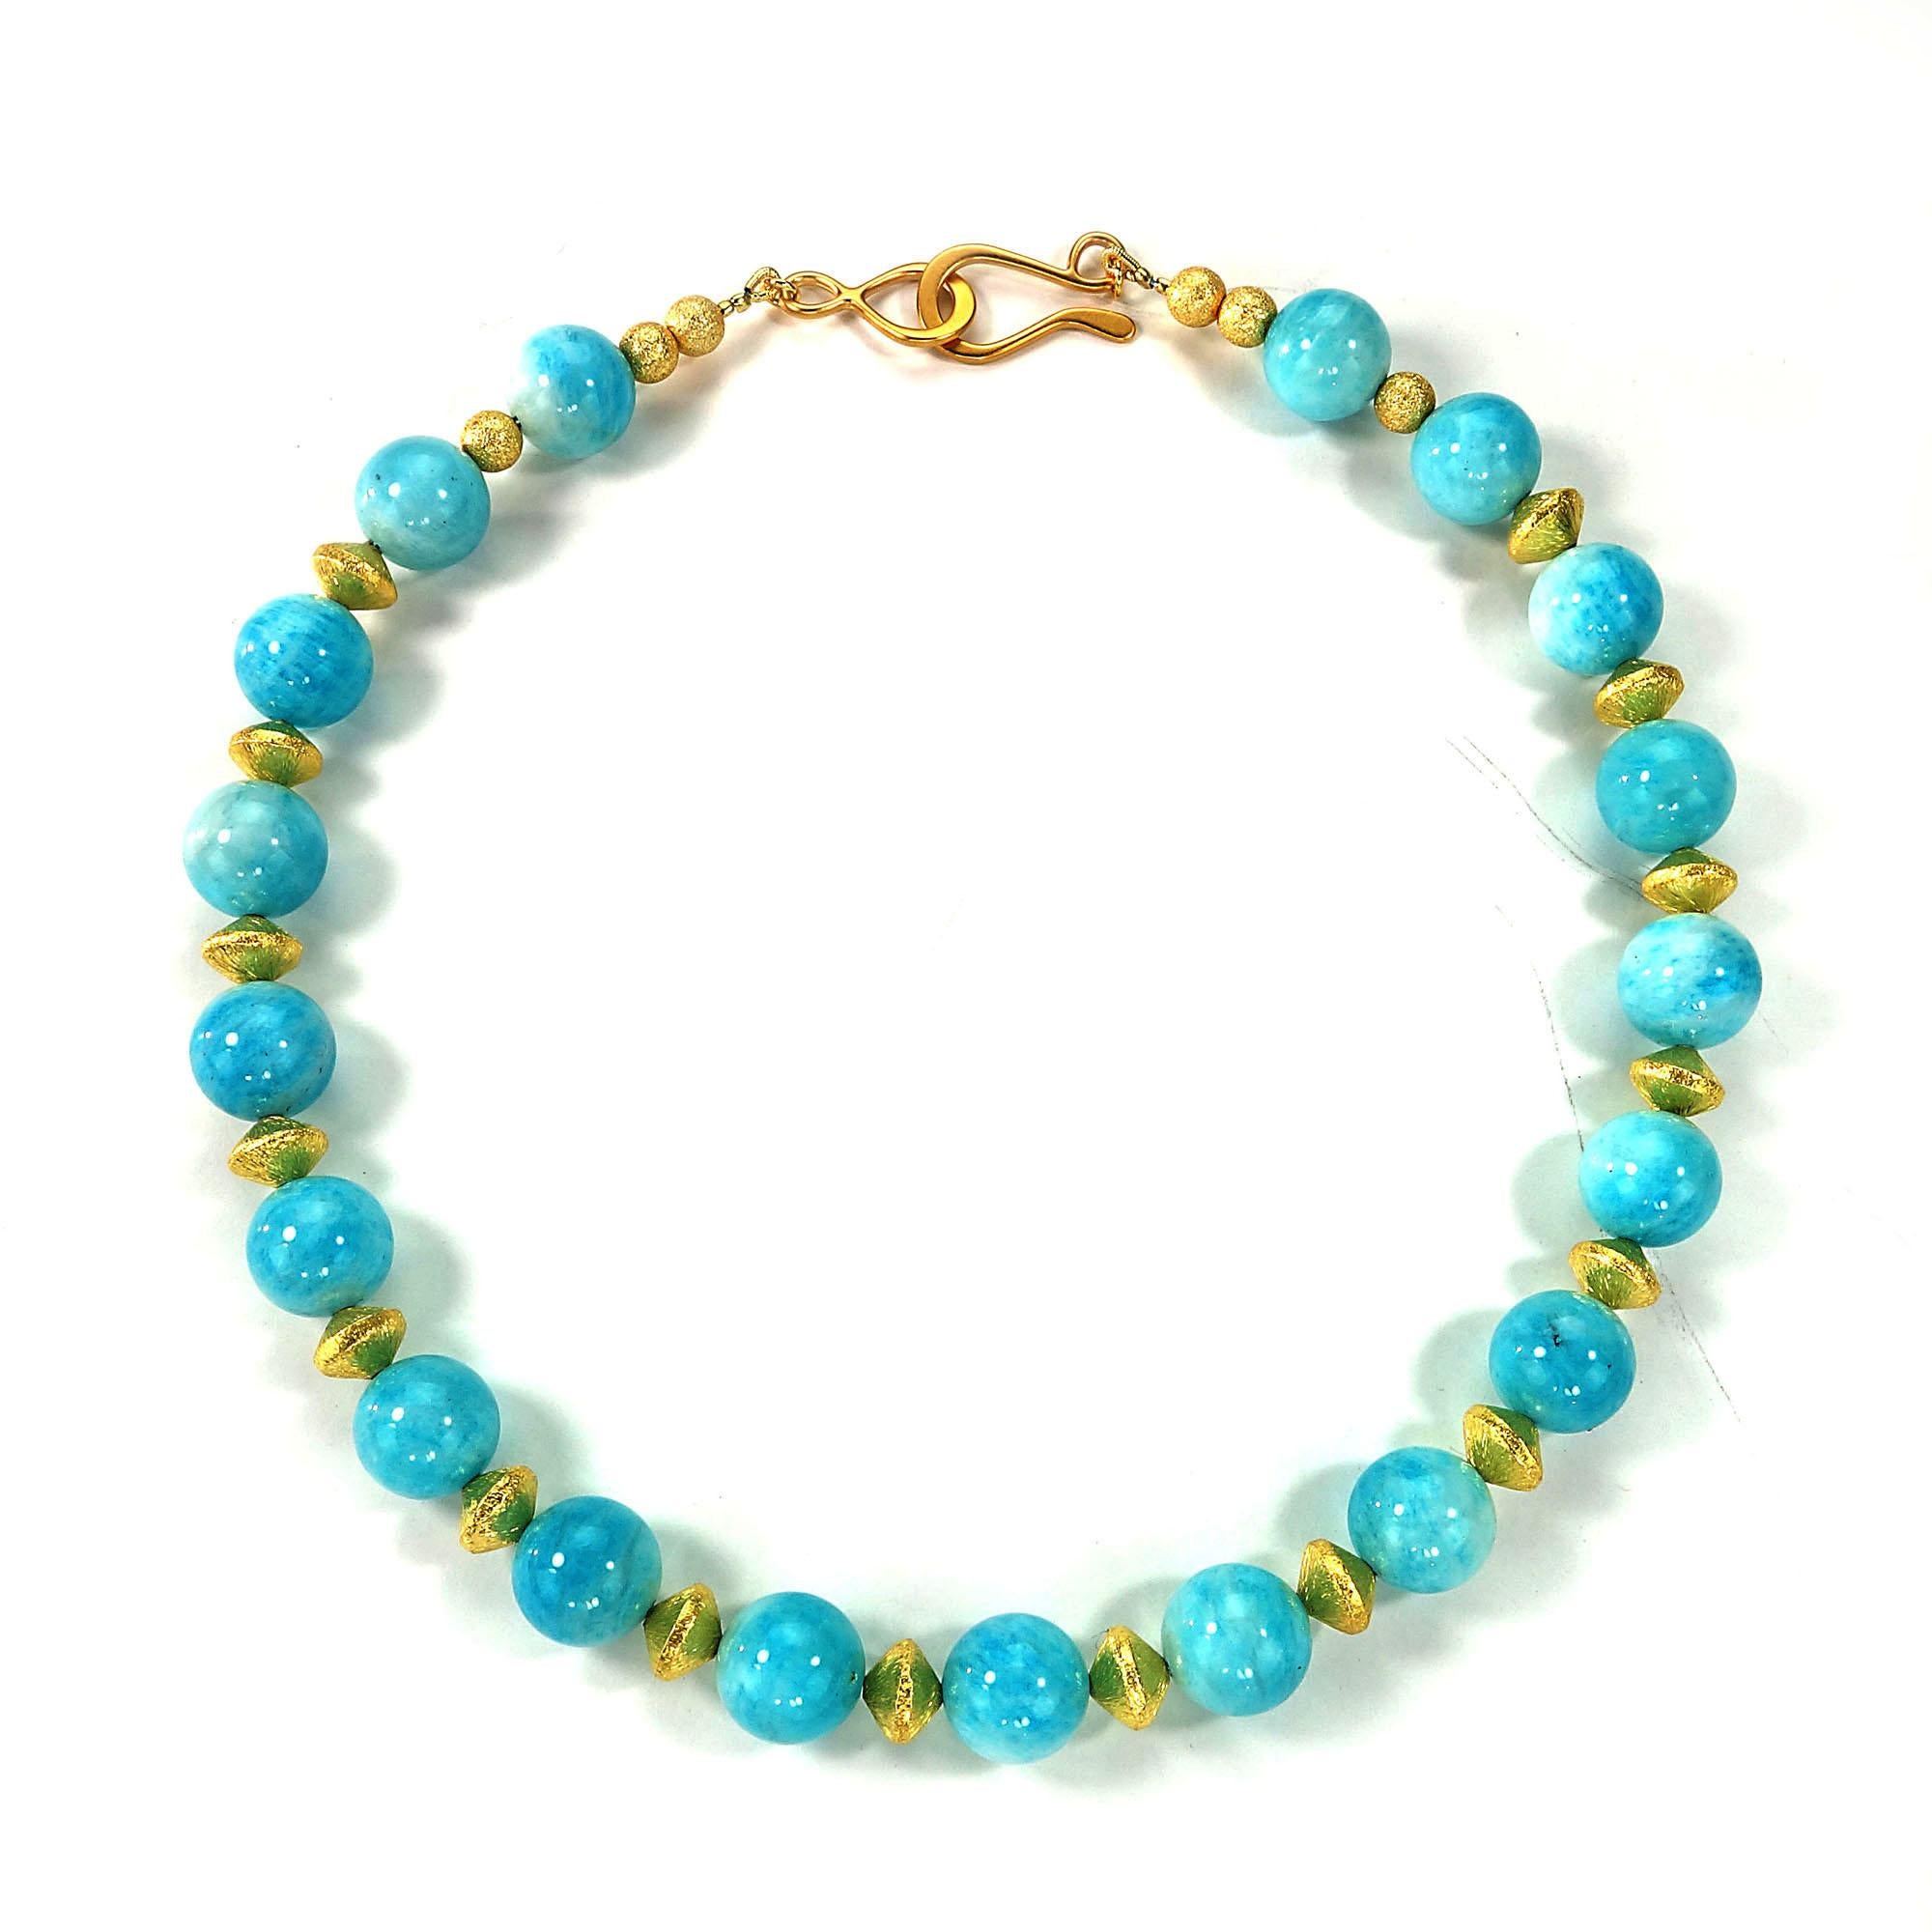 Necklace of 12 MM highly polished Amazonite enhanced with gold tone spacers and 24K gold vermeil hook and eye.  This lovely Amazonite Choker caresses your neck and whispers 'Spring' in your ear.  This handmade necklace is a 16 inch choker length. 